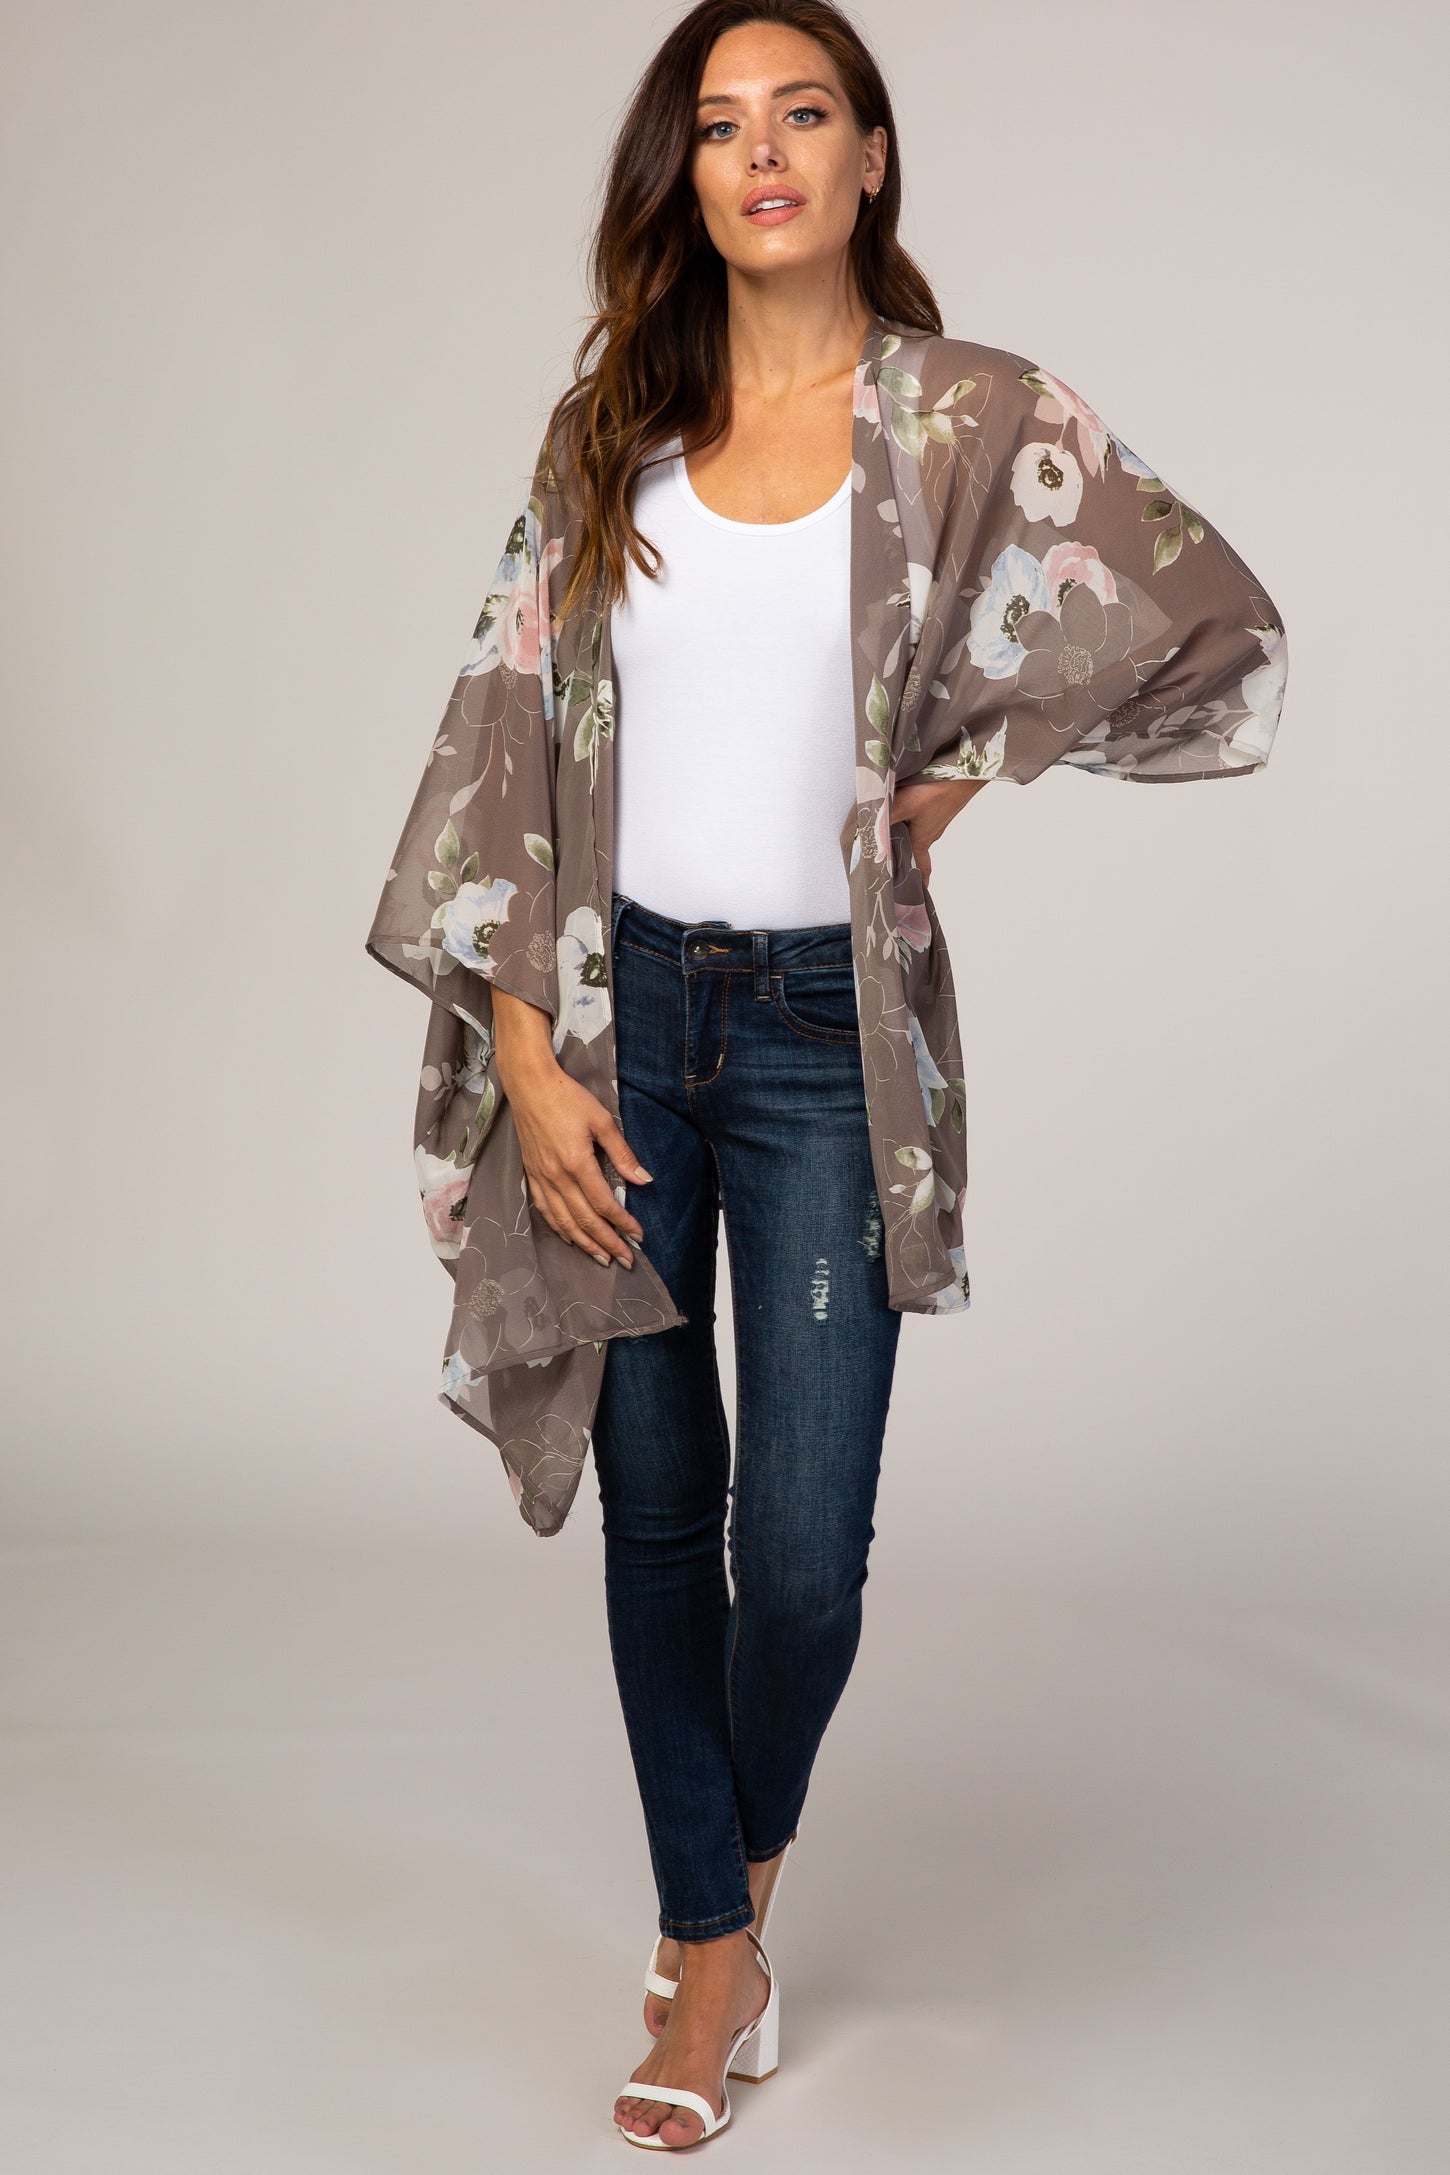 Grey Floral Sheer Maternity Cover Up– PinkBlush